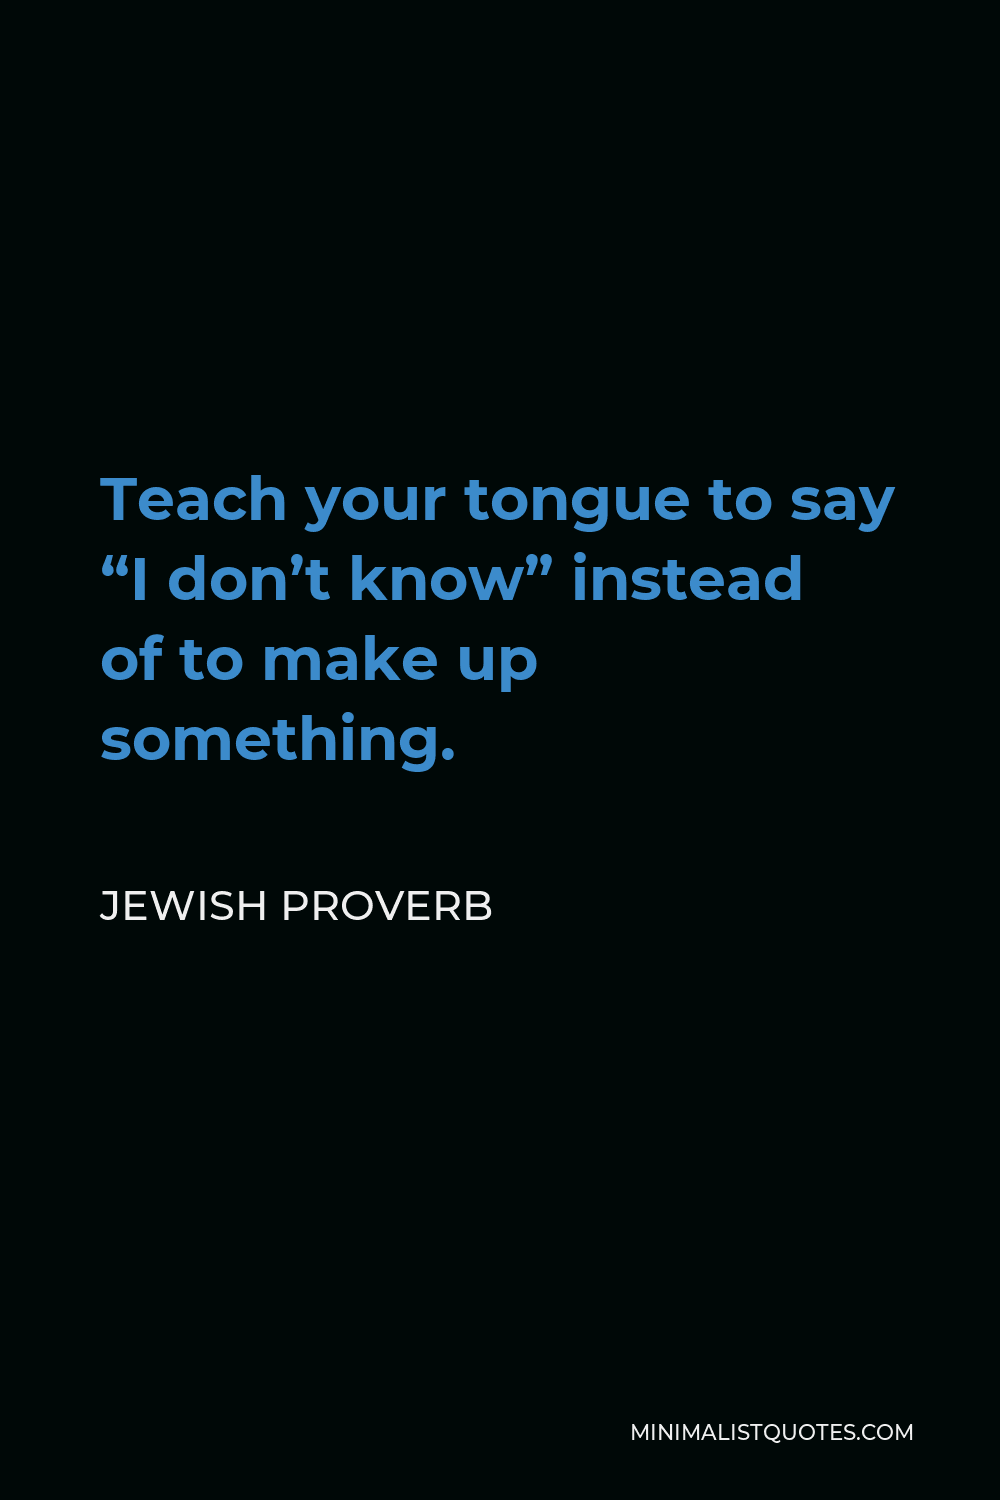 Jewish Proverb Quote - Teach your tongue to say “I don’t know” instead of to make up something.